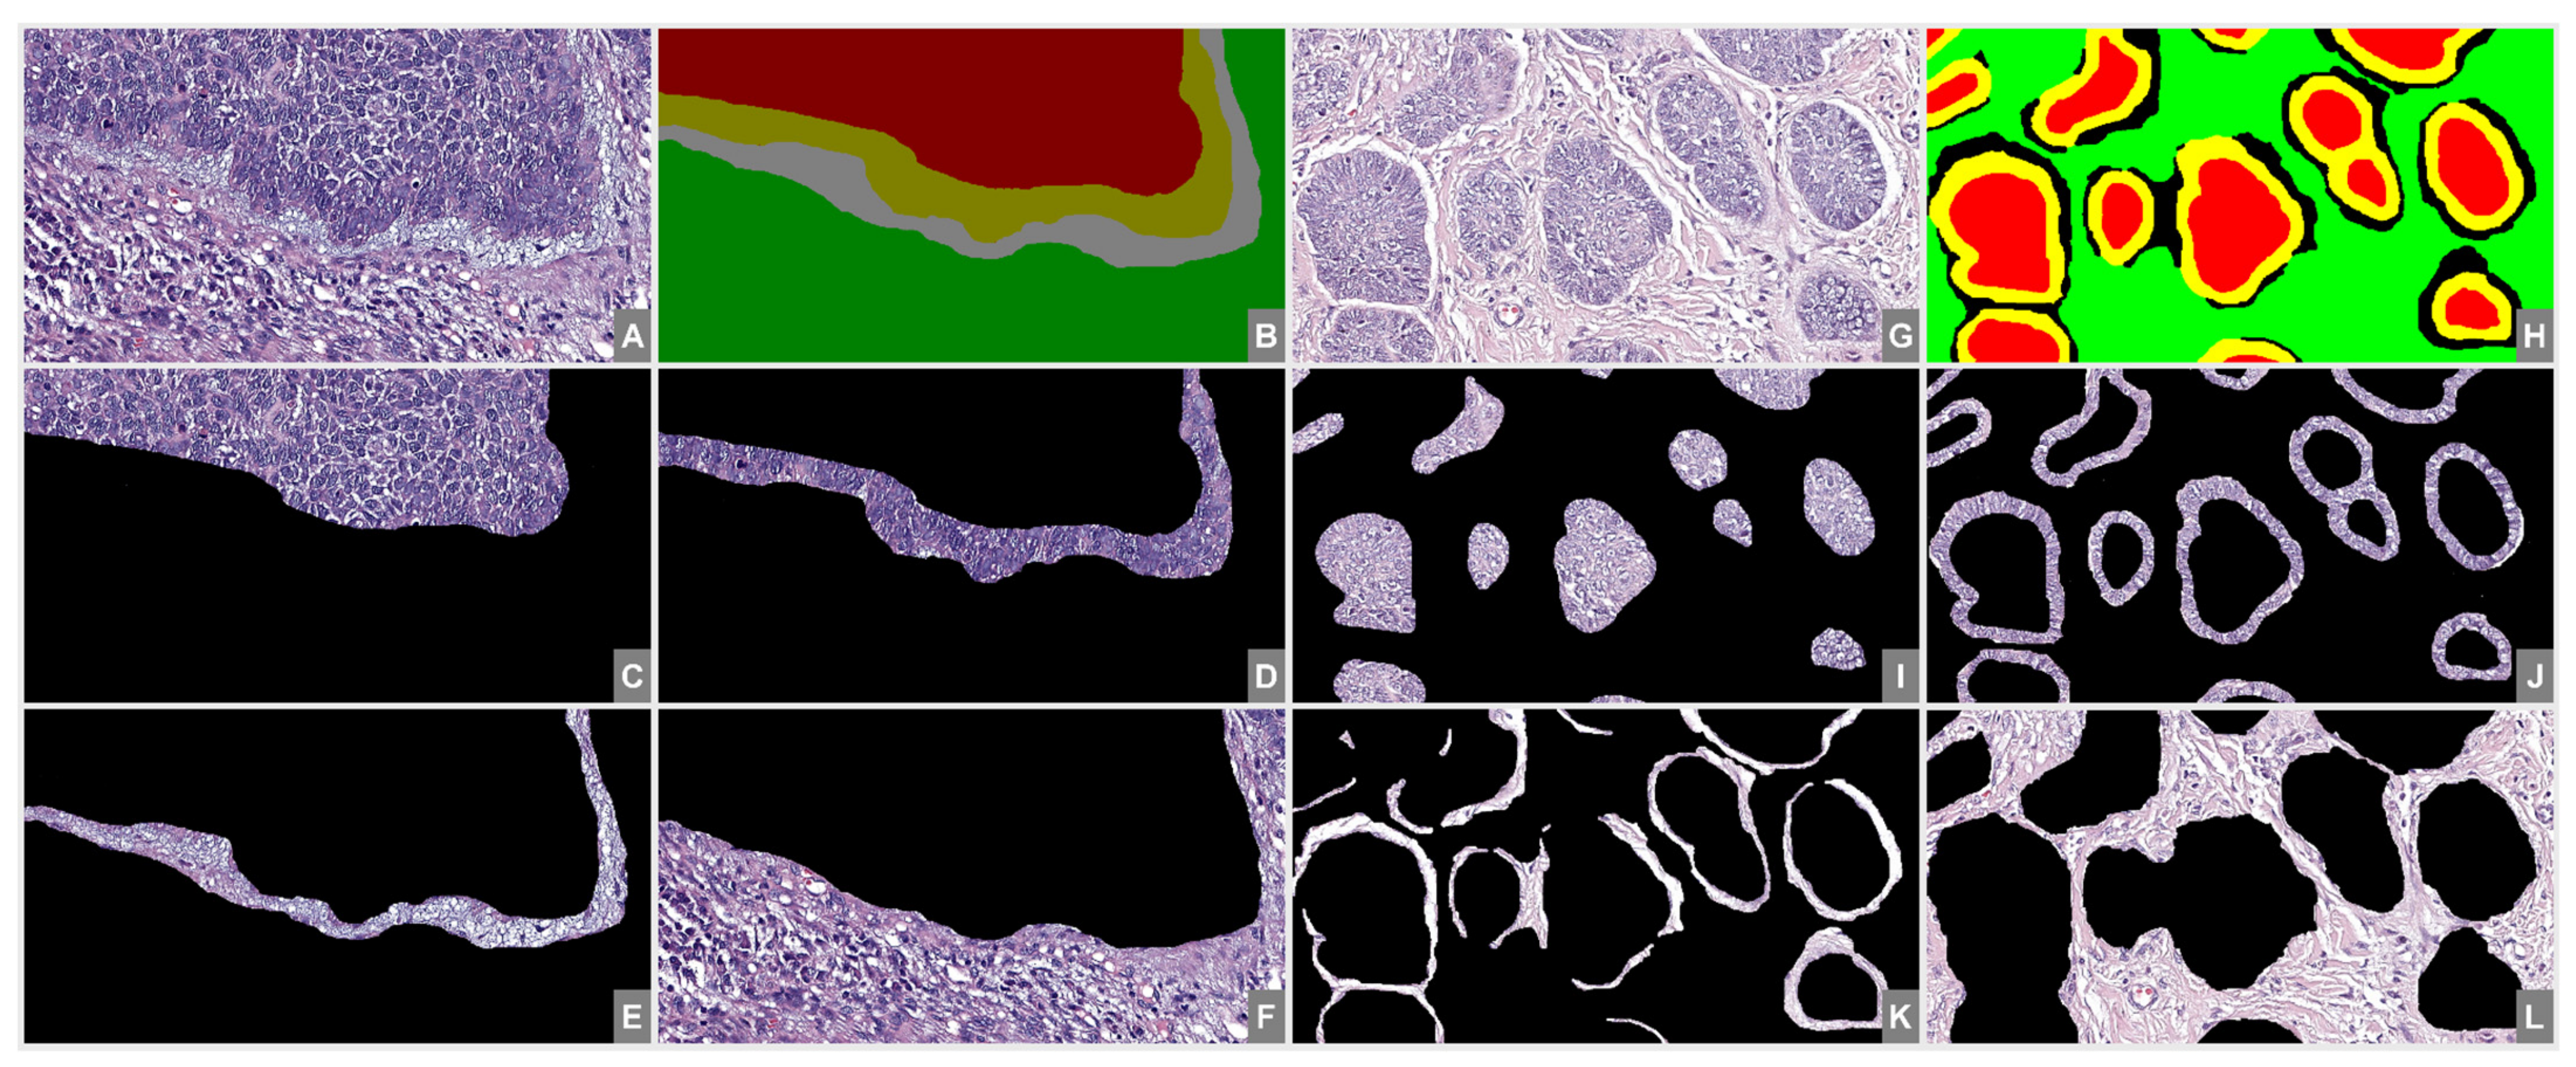 File:Normal breast histology.png - Wikipedia